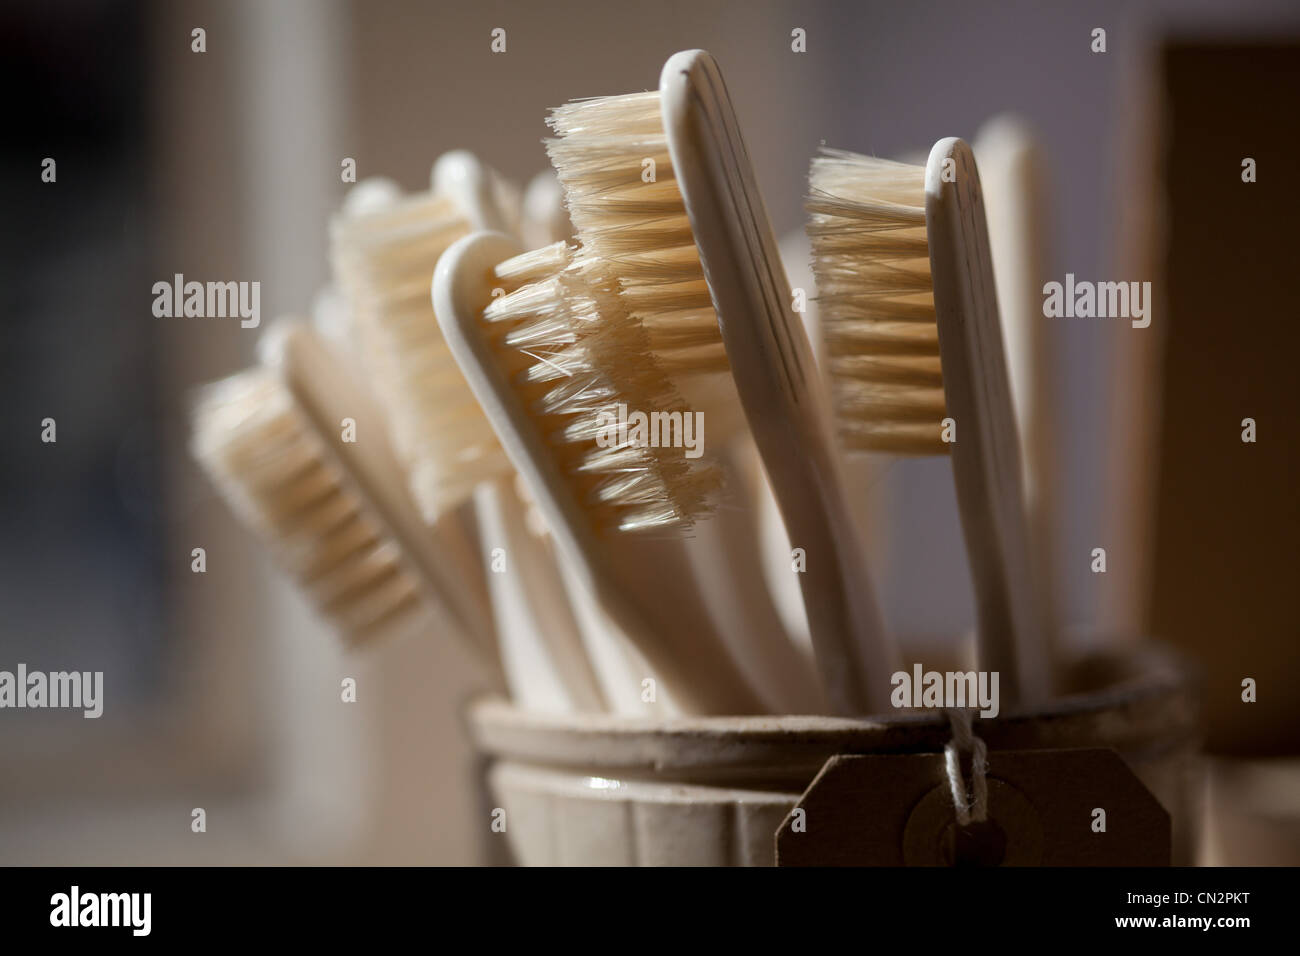 Toothbrushes in pot Stock Photo